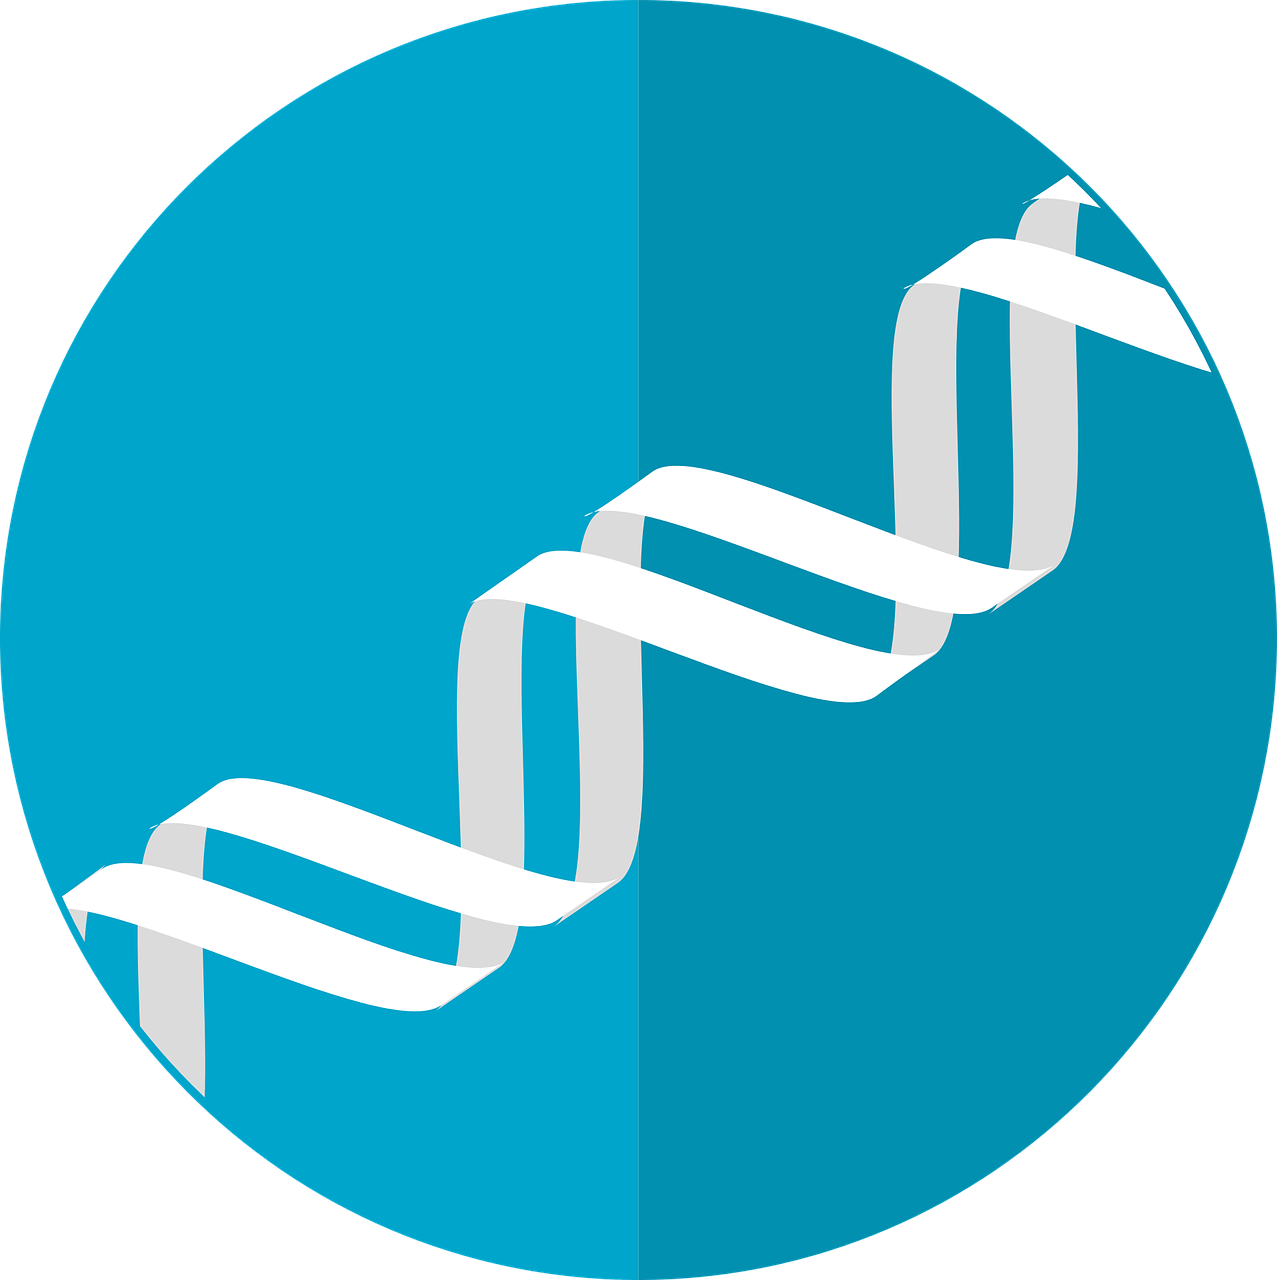 dna clipart gene therapy